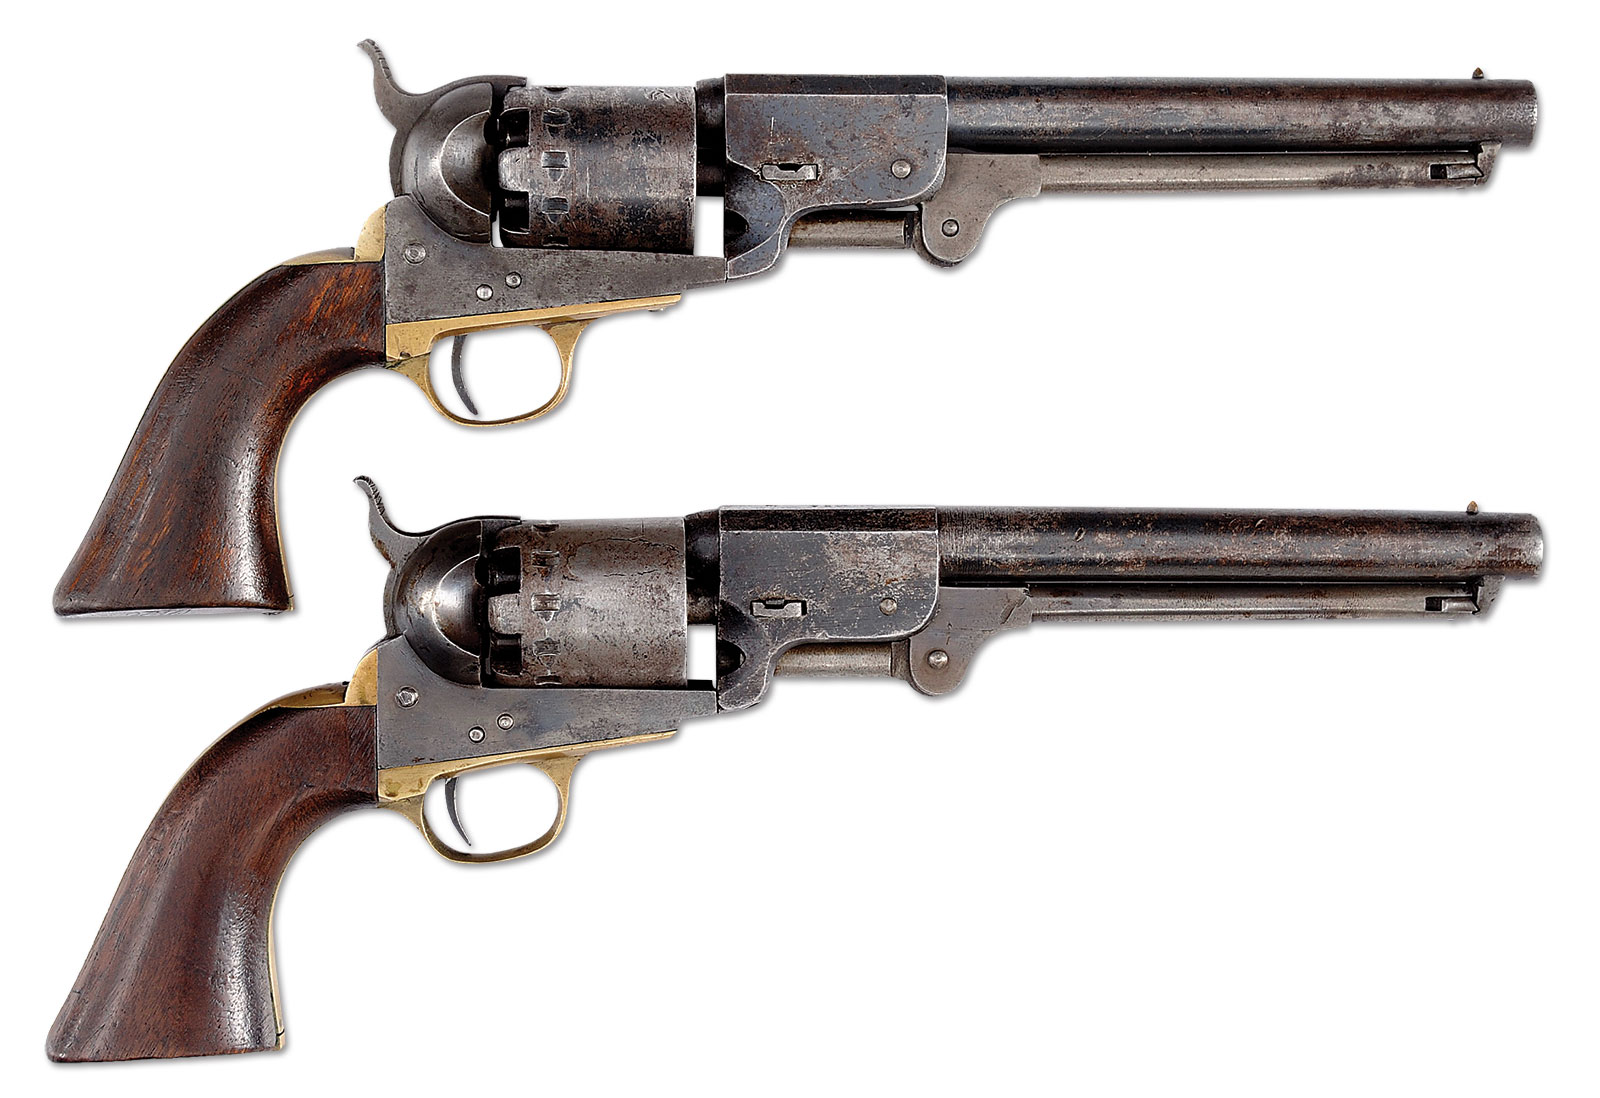 Consecutively Numbered Confederate Pistols Known, Rigdon & Ansley Revolvers, estimated at $60,000-80,000.